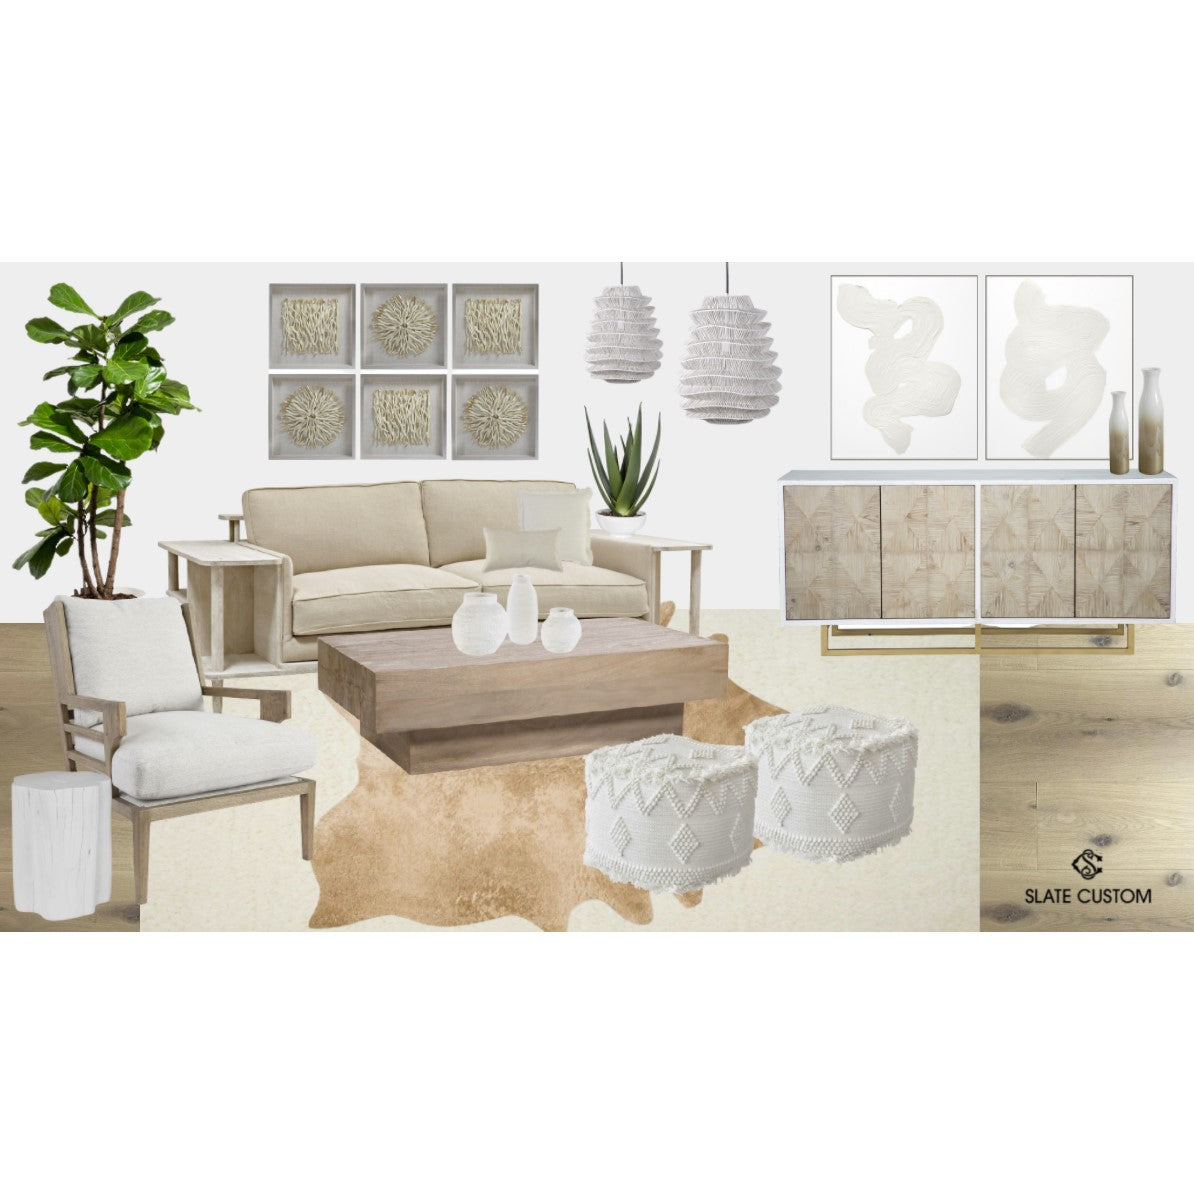 Curated Look - Neutral Living Room 1